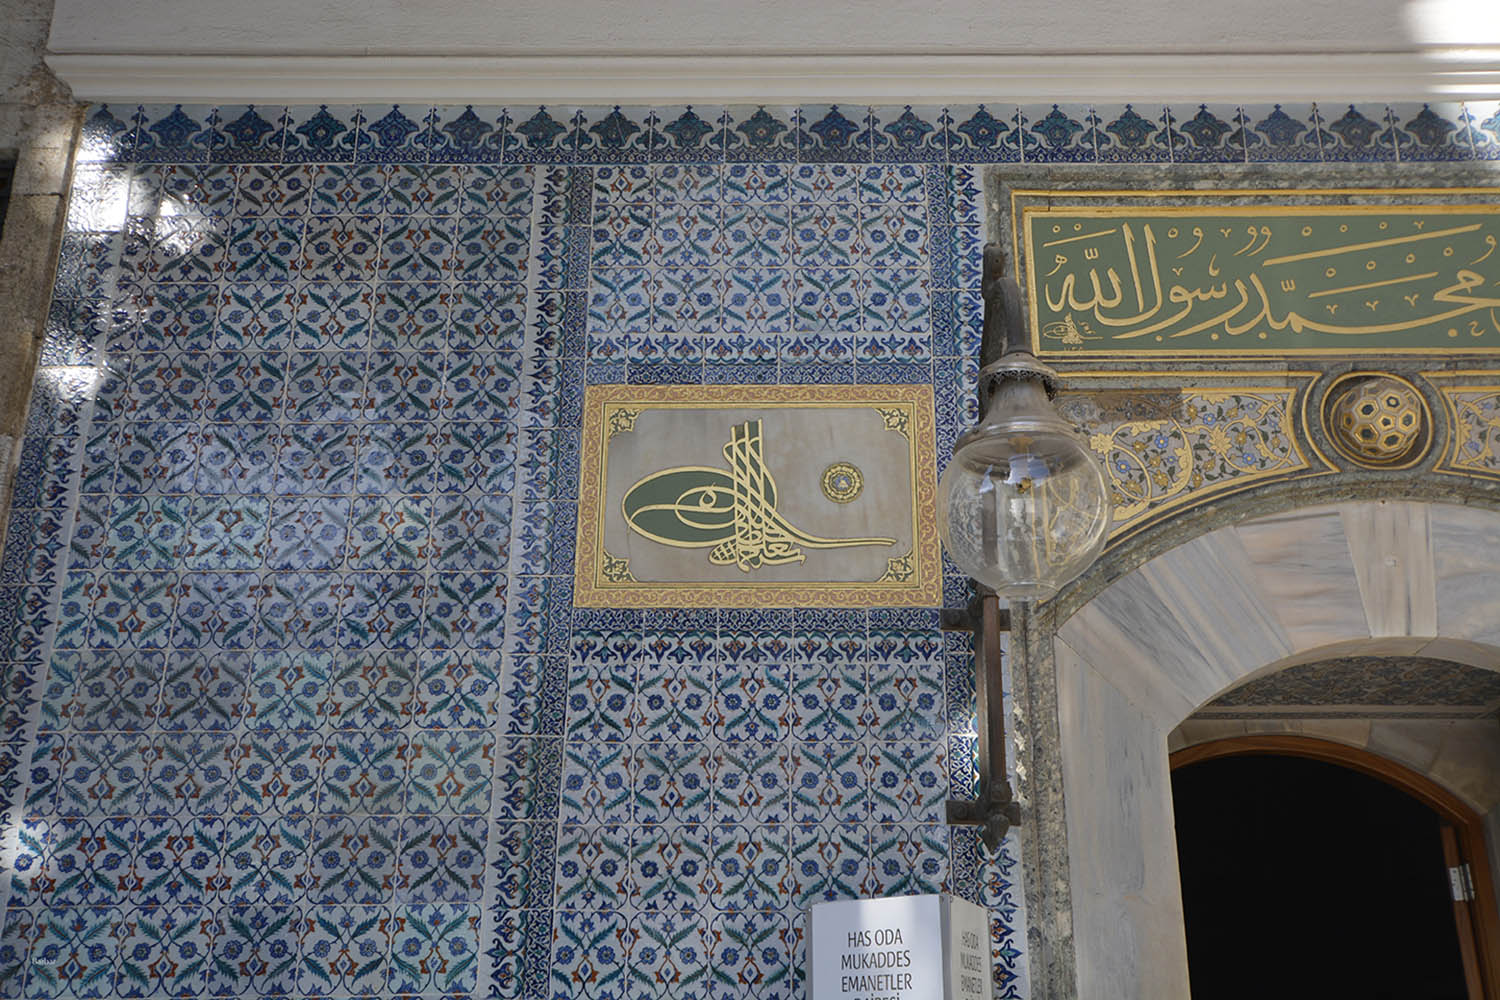 Exterior of the Privy Room (Has Oda) with Sultanic tuğra and Iznik tiles in the Third Court.